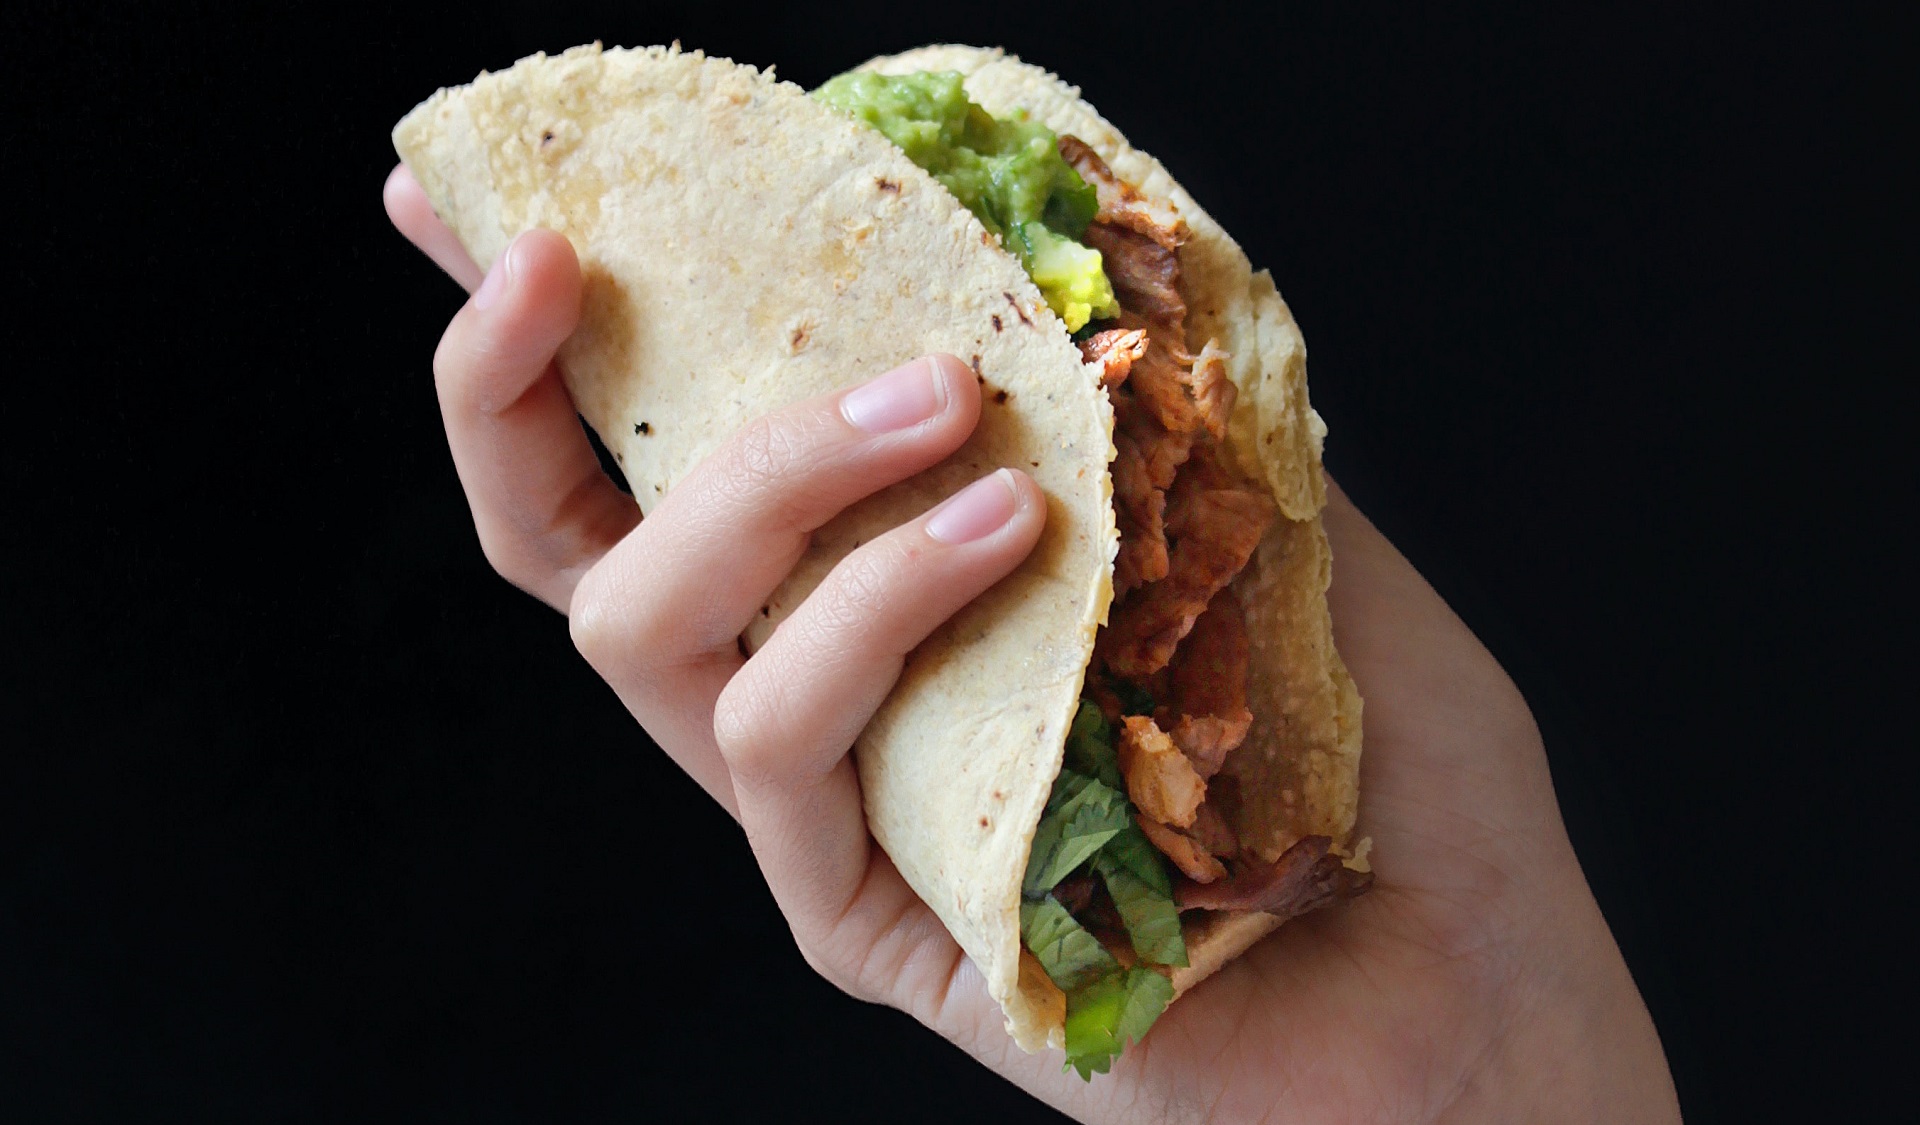 Hand holding kebab with fillings